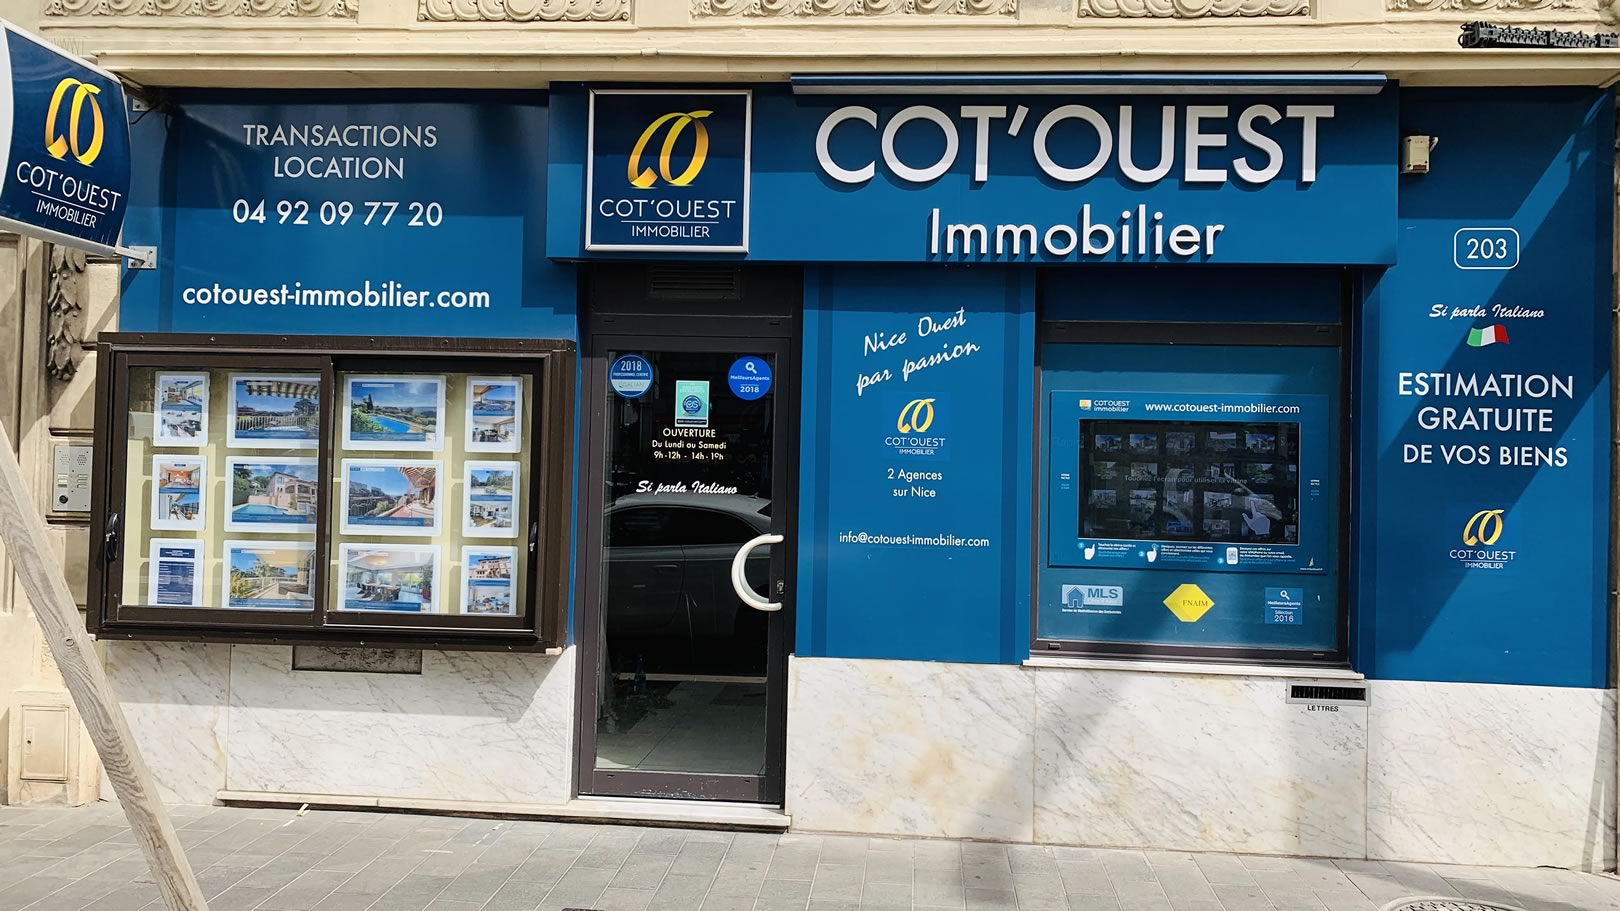 Cot'ouest Immobilier